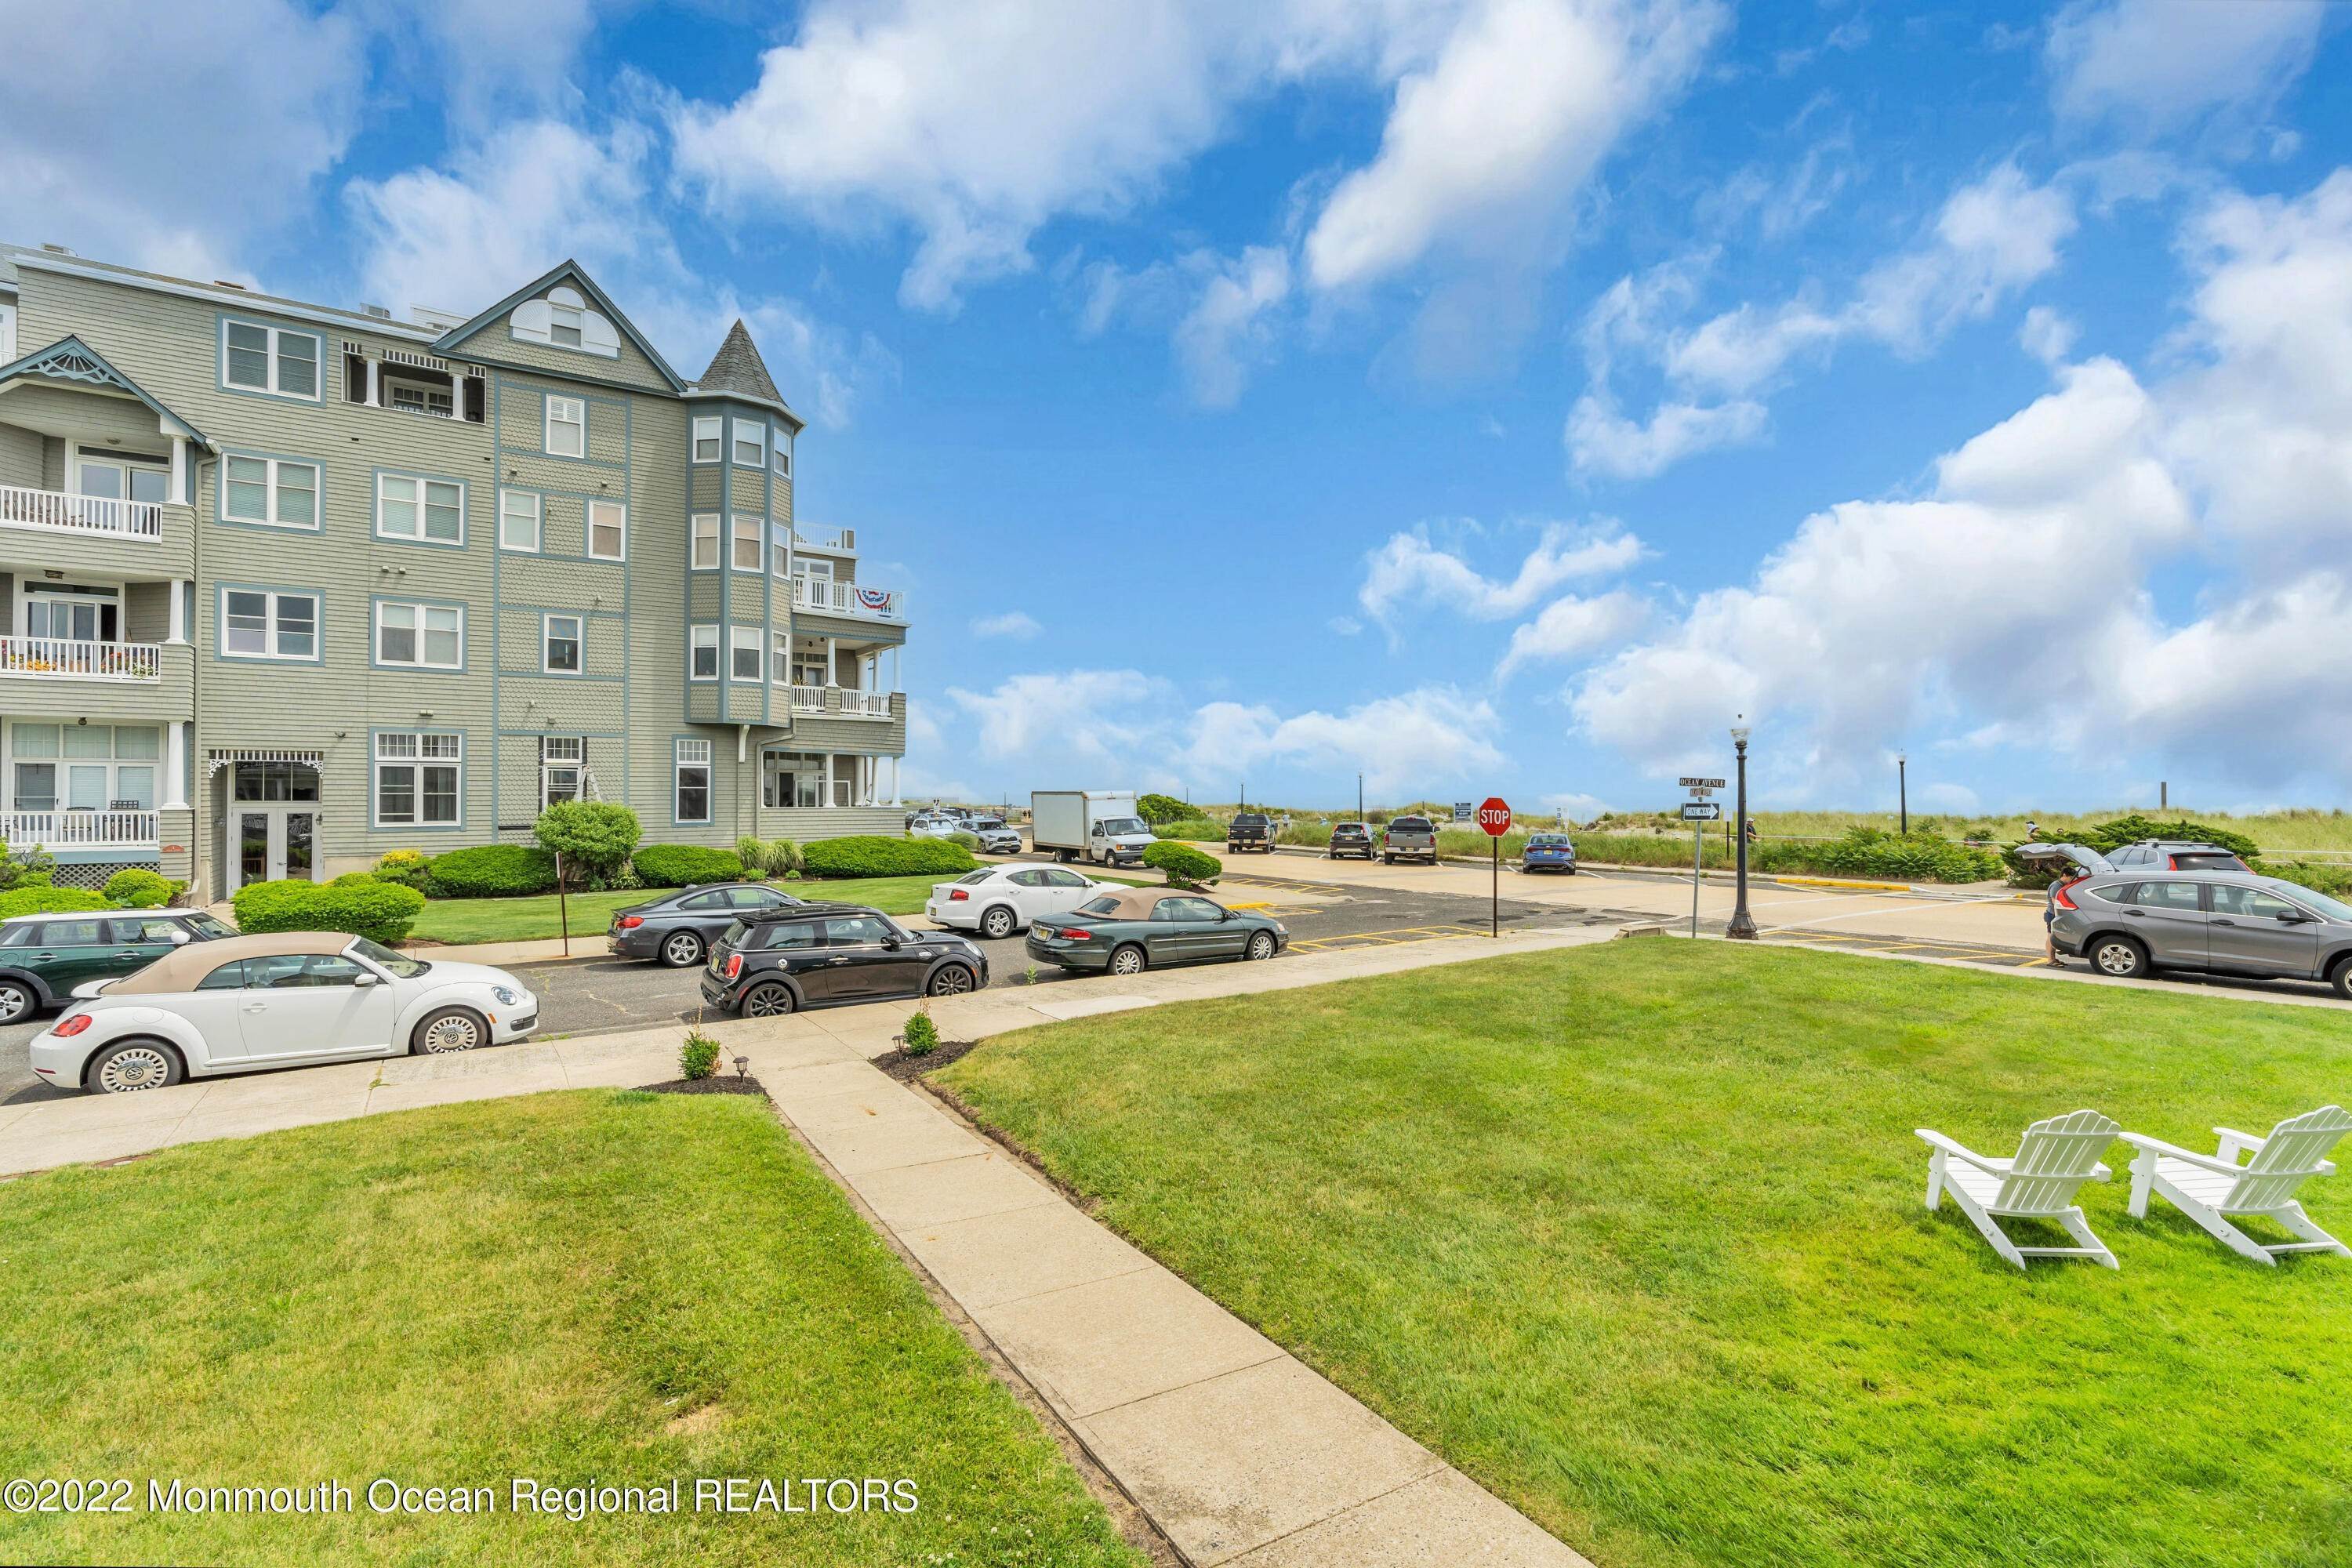 7. Residential Lease at 5 Ocean Avenue 3 Ocean Grove, New Jersey 07756 United States